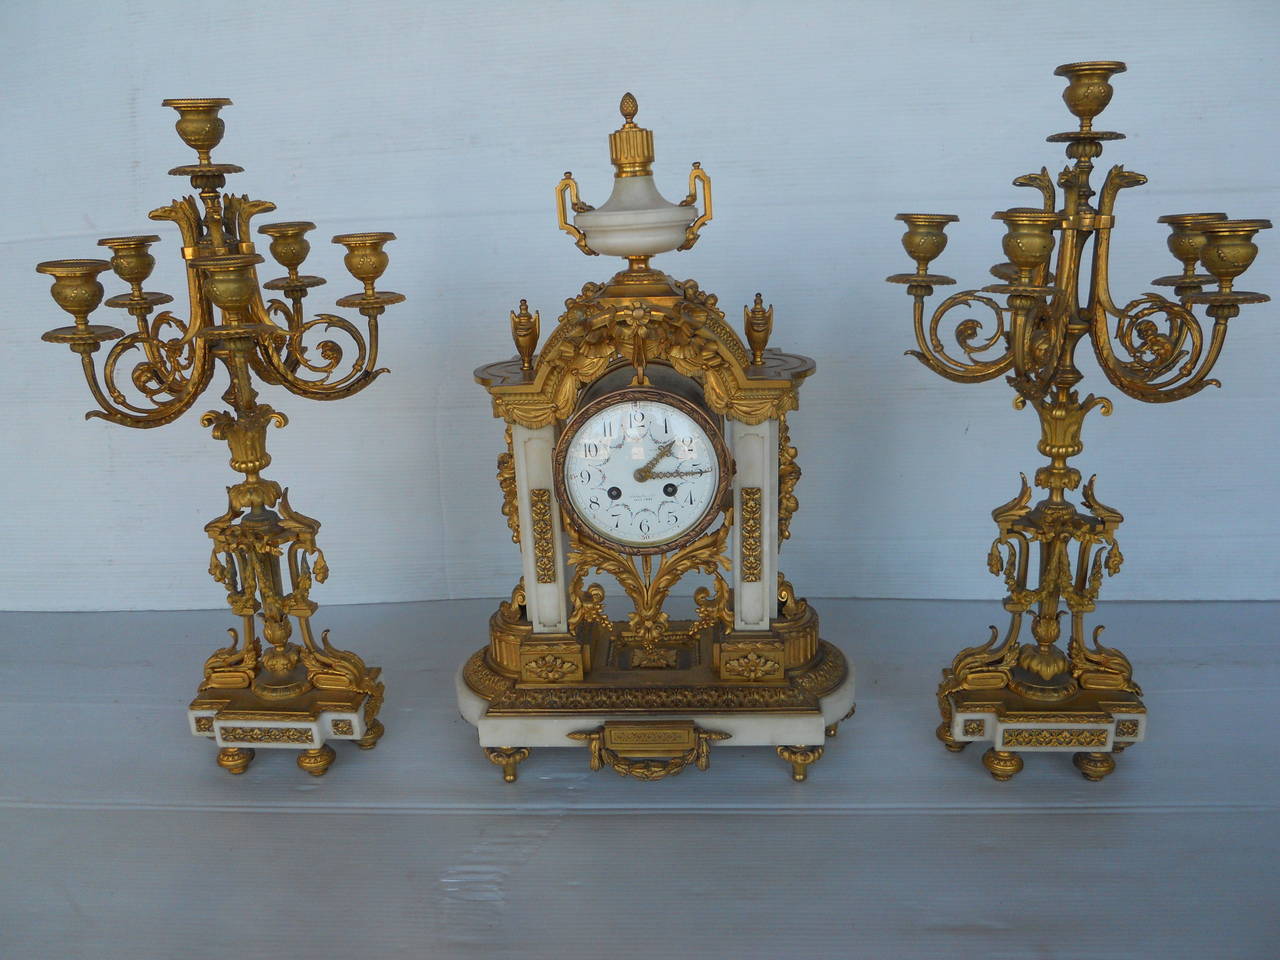 French 19th century clock set
1 clock and 2 candelabras made of marble and gilt bronze
marked: Medaillos d'Or
The dimensions below are for the clock
dimensions for each candelabra: 22.5